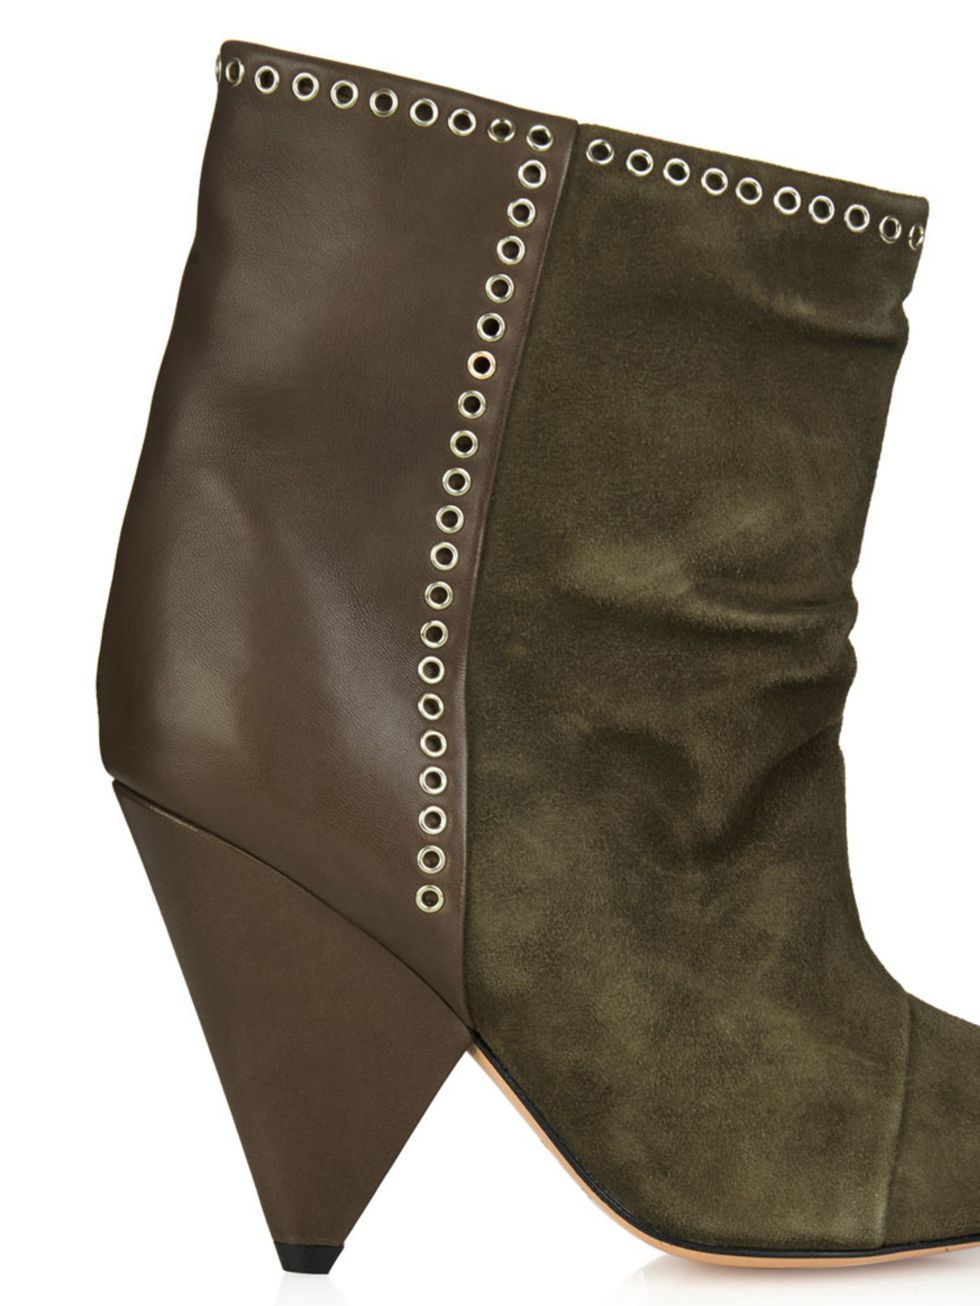 Brown, Boot, Tan, Costume accessory, Beige, Khaki, Leather, Liver, Motorcycle boot, Work boots, 